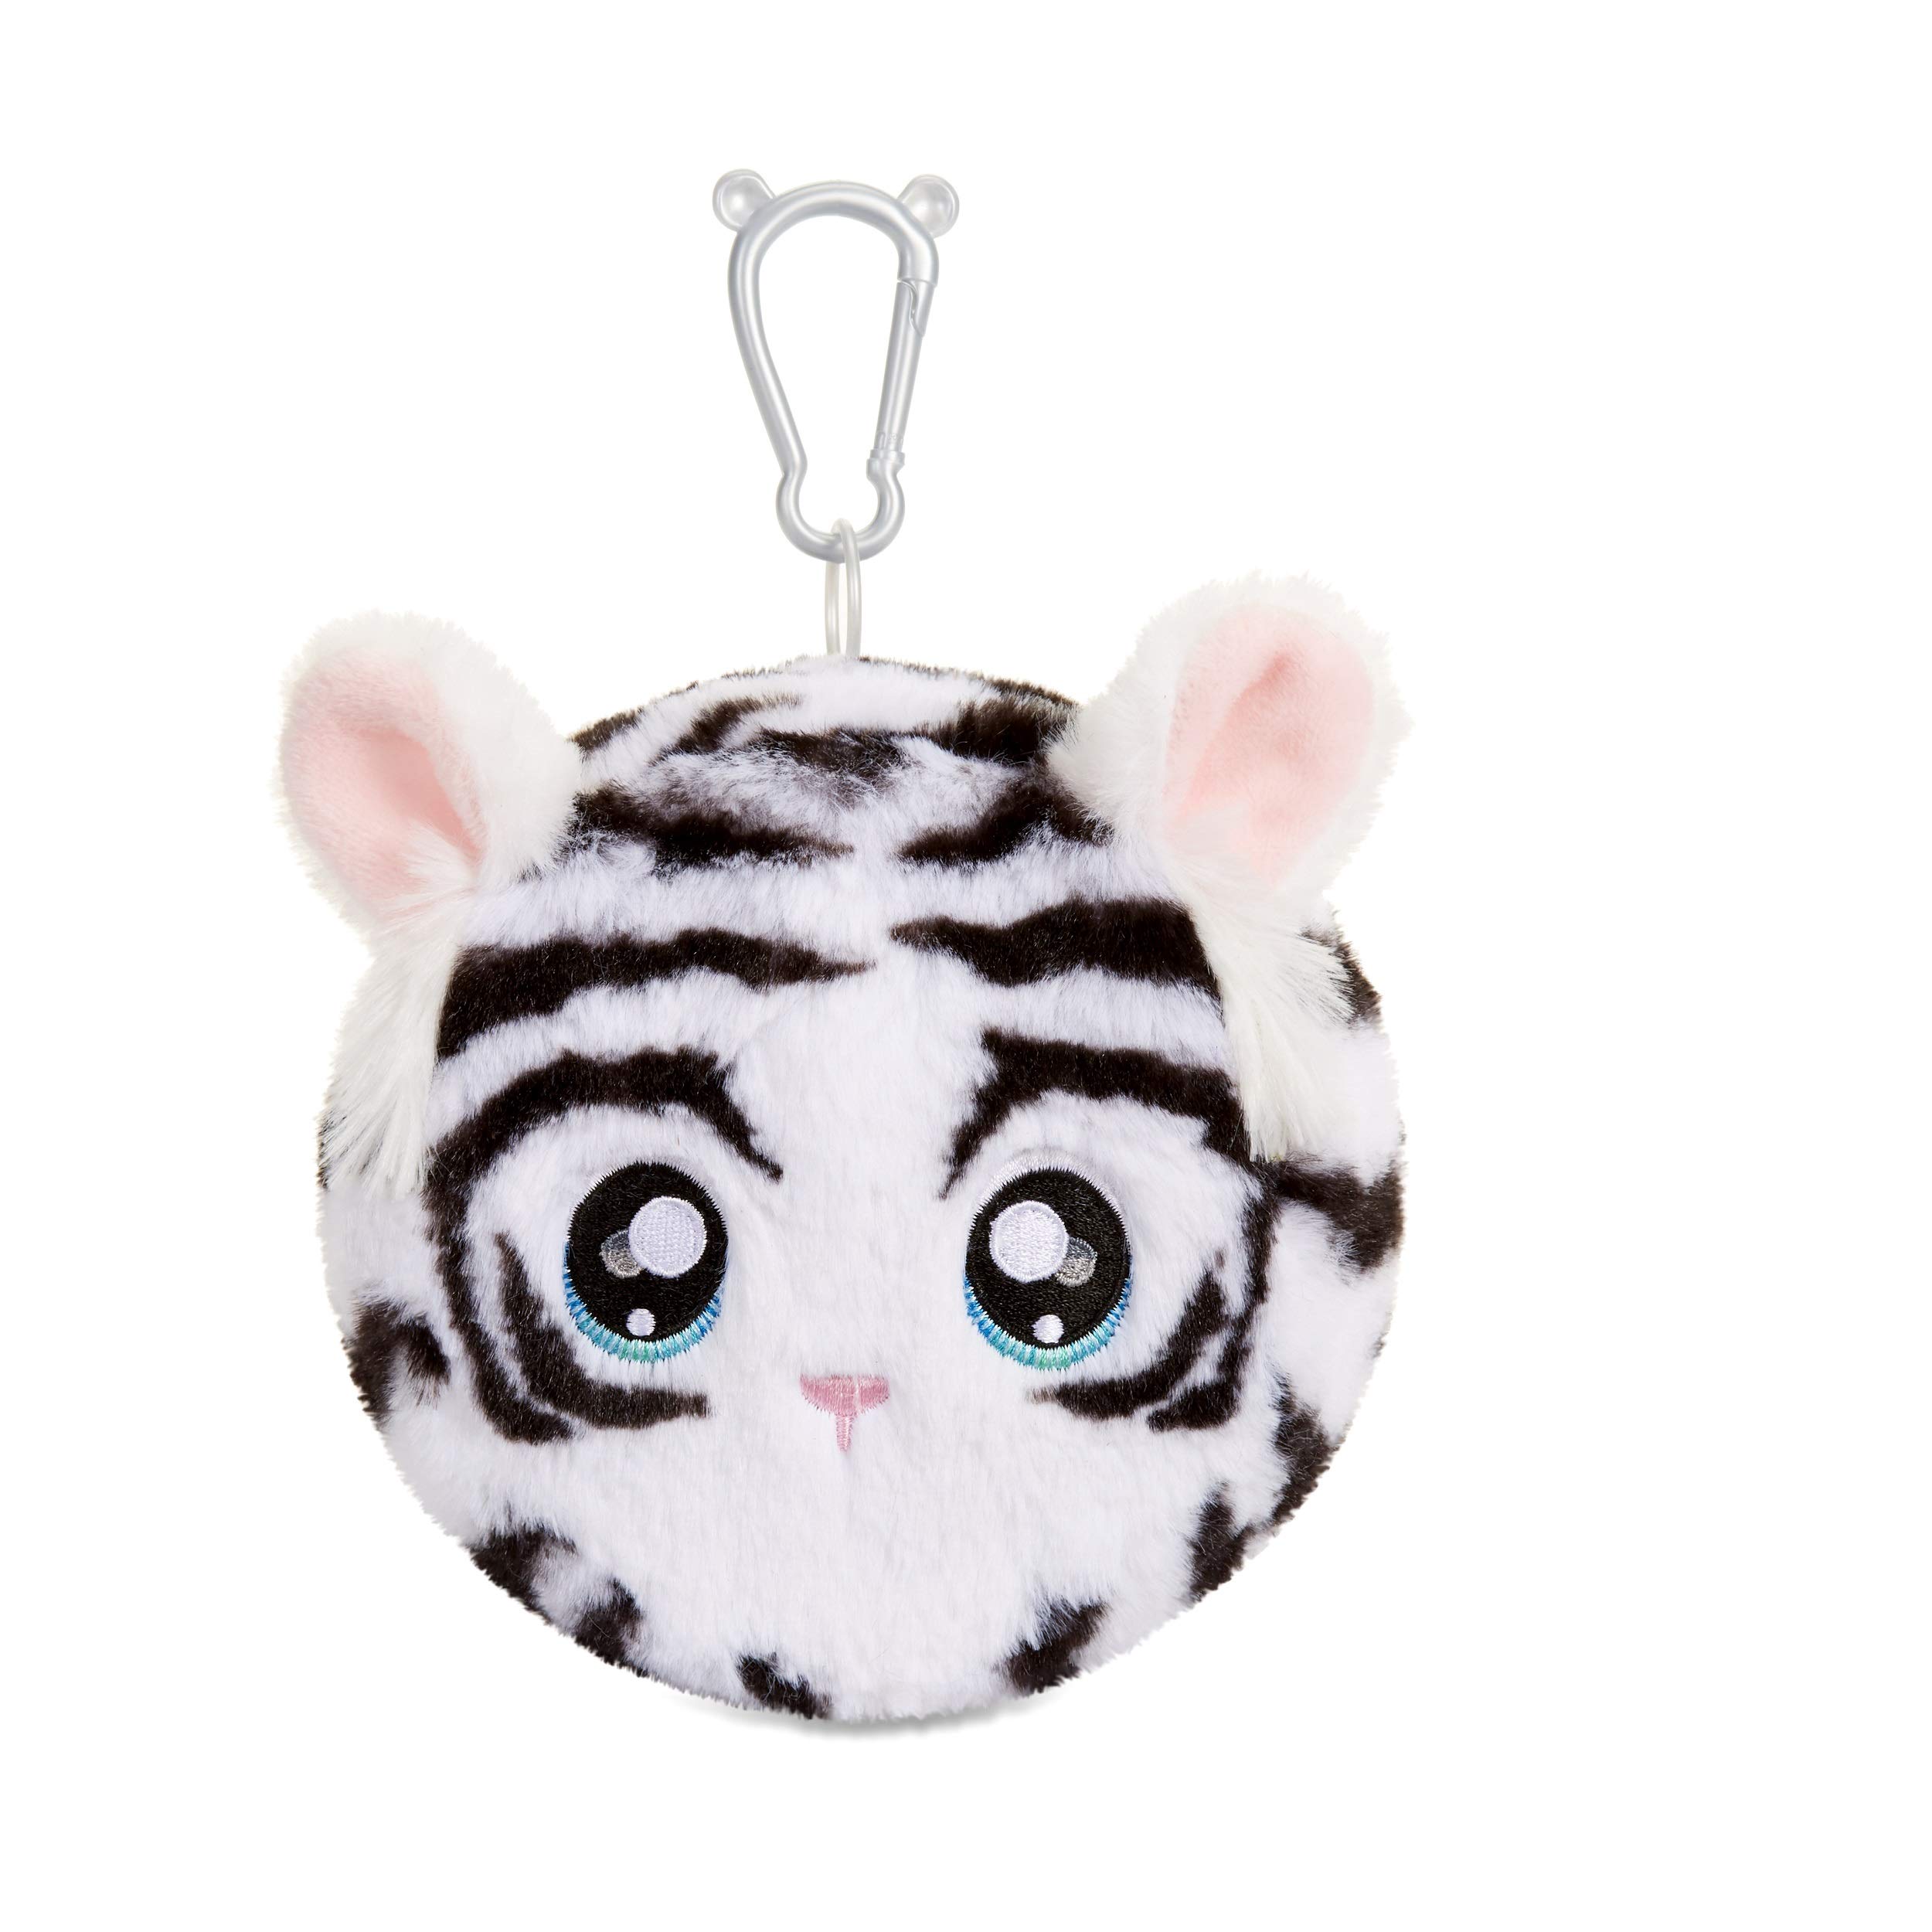 Na! Na! Na! Surprise 2-in-1 Bianca Bengal Fashion Doll & -Plush Purse Series 4 – Soft Wallet Bag Pouch Gifts for Kids Girls Key Chain Pom